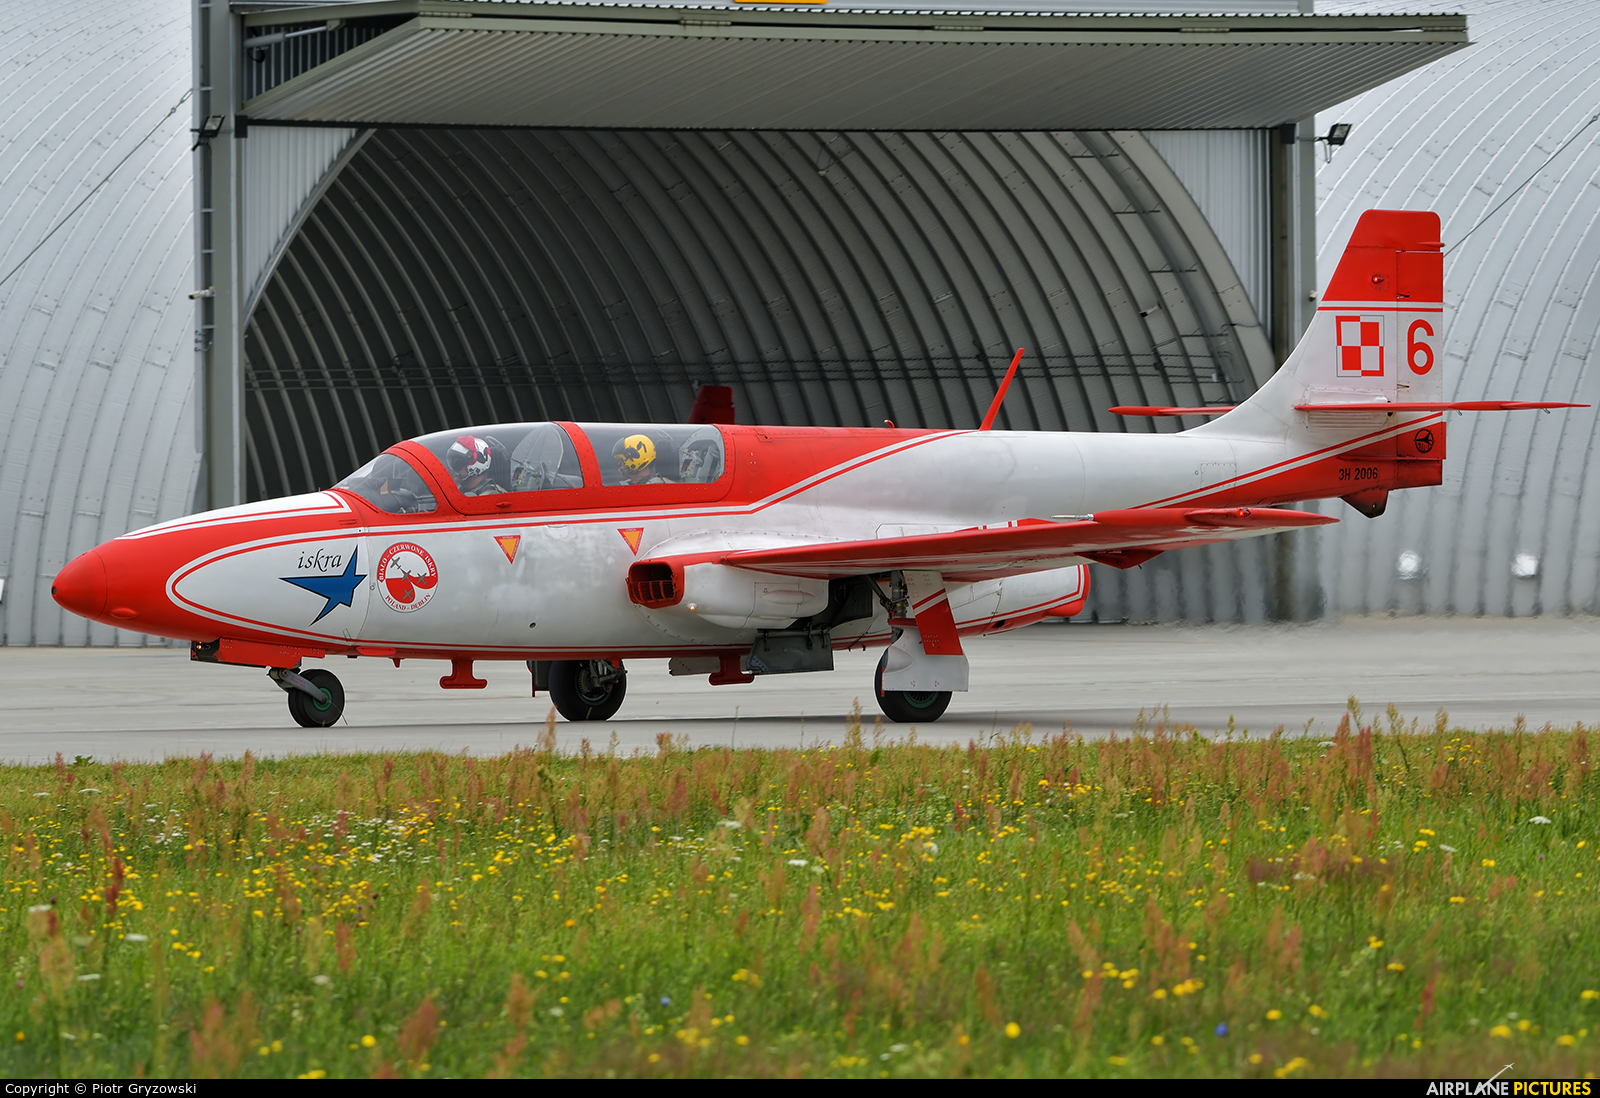 Poland - Air Force: White & Red Iskras 2006 aircraft at Dęblin